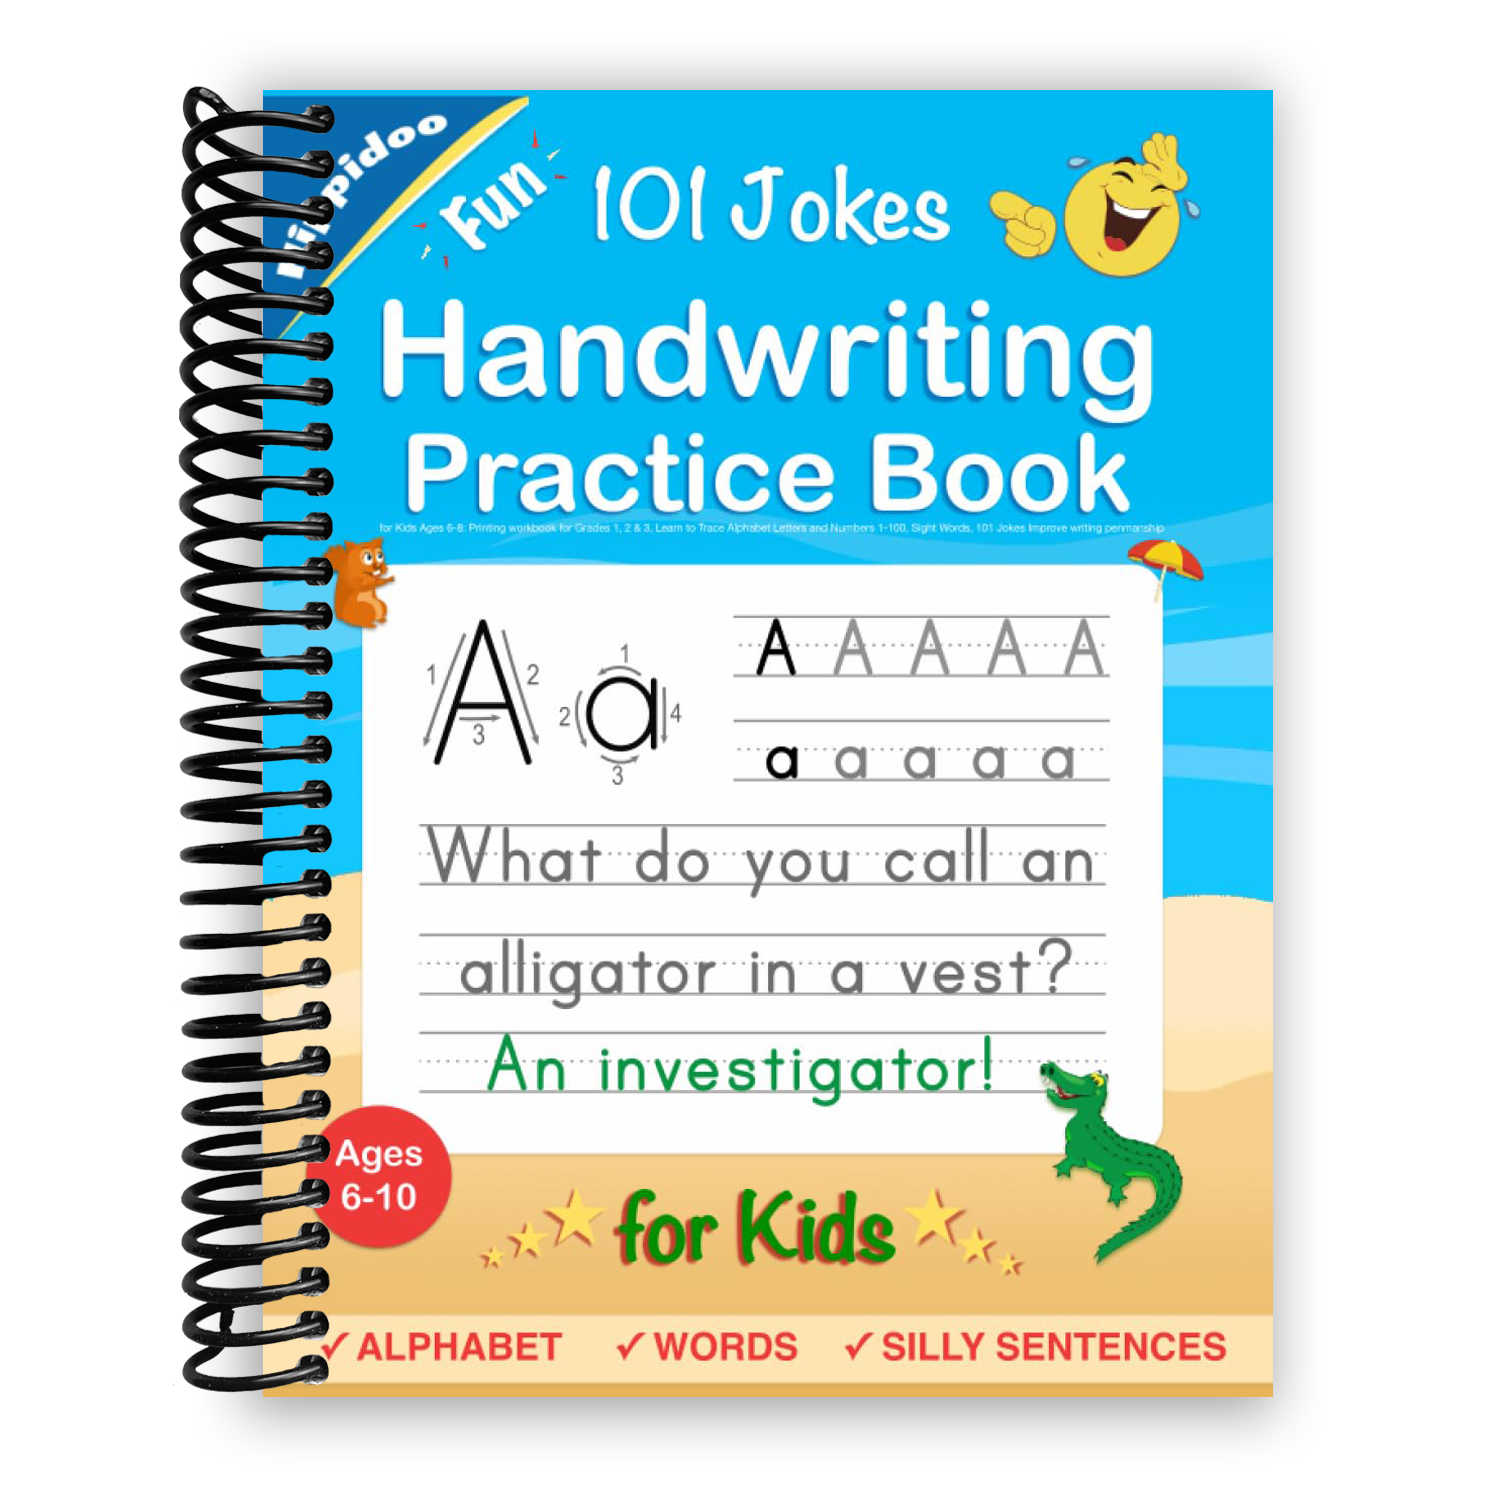 Letter Tracing: Practice Book, Writing Page, Handwriting For Kids,  Kindergarten & Preschoolers, Ages 3-5, Learn & Write Uppercase & Lo  (Paperback)